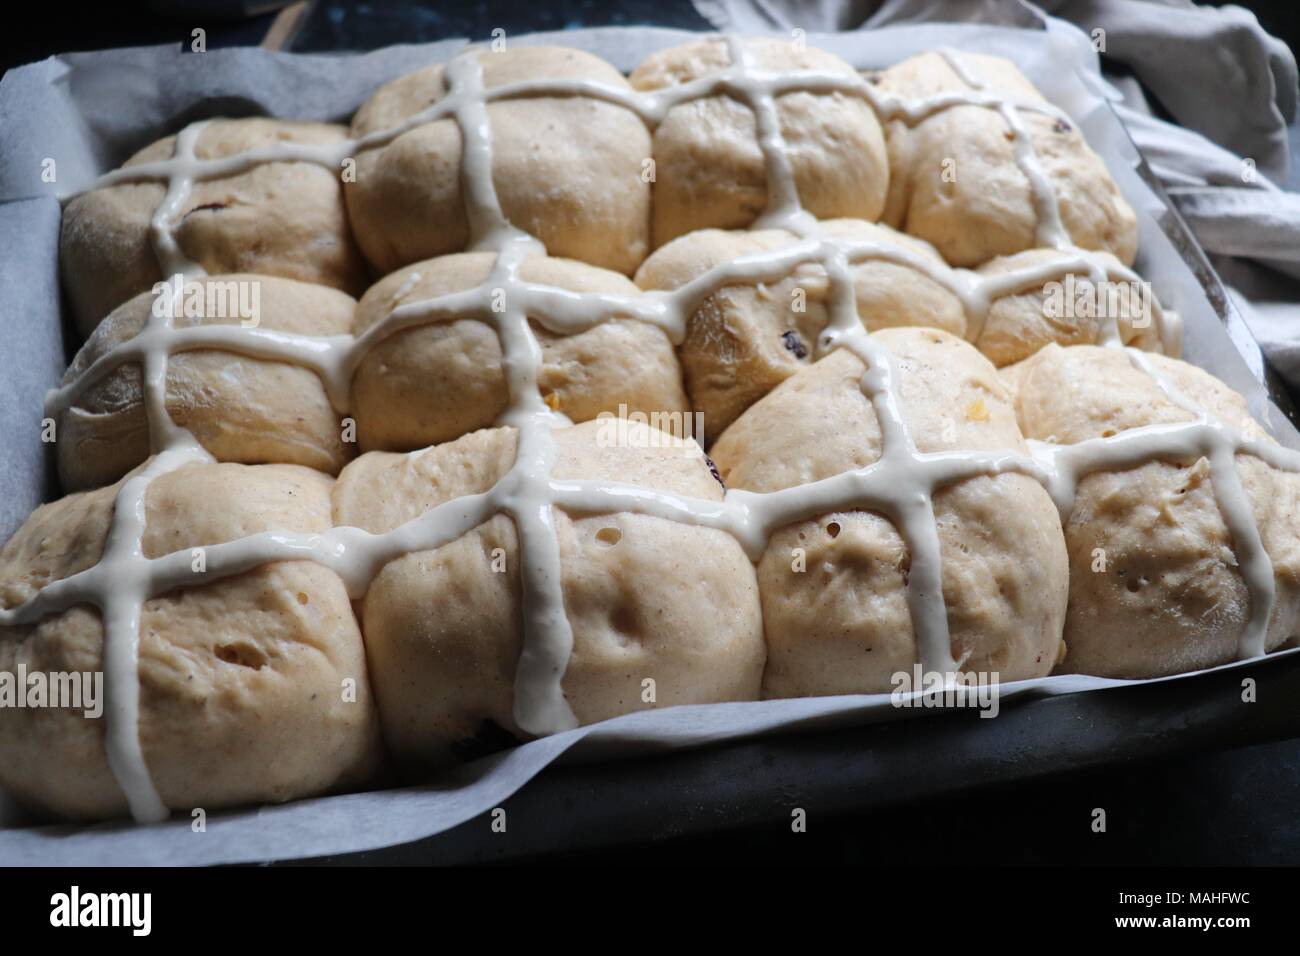 Home Made Hot Cross Buns About to go in the Oven Stock Photo